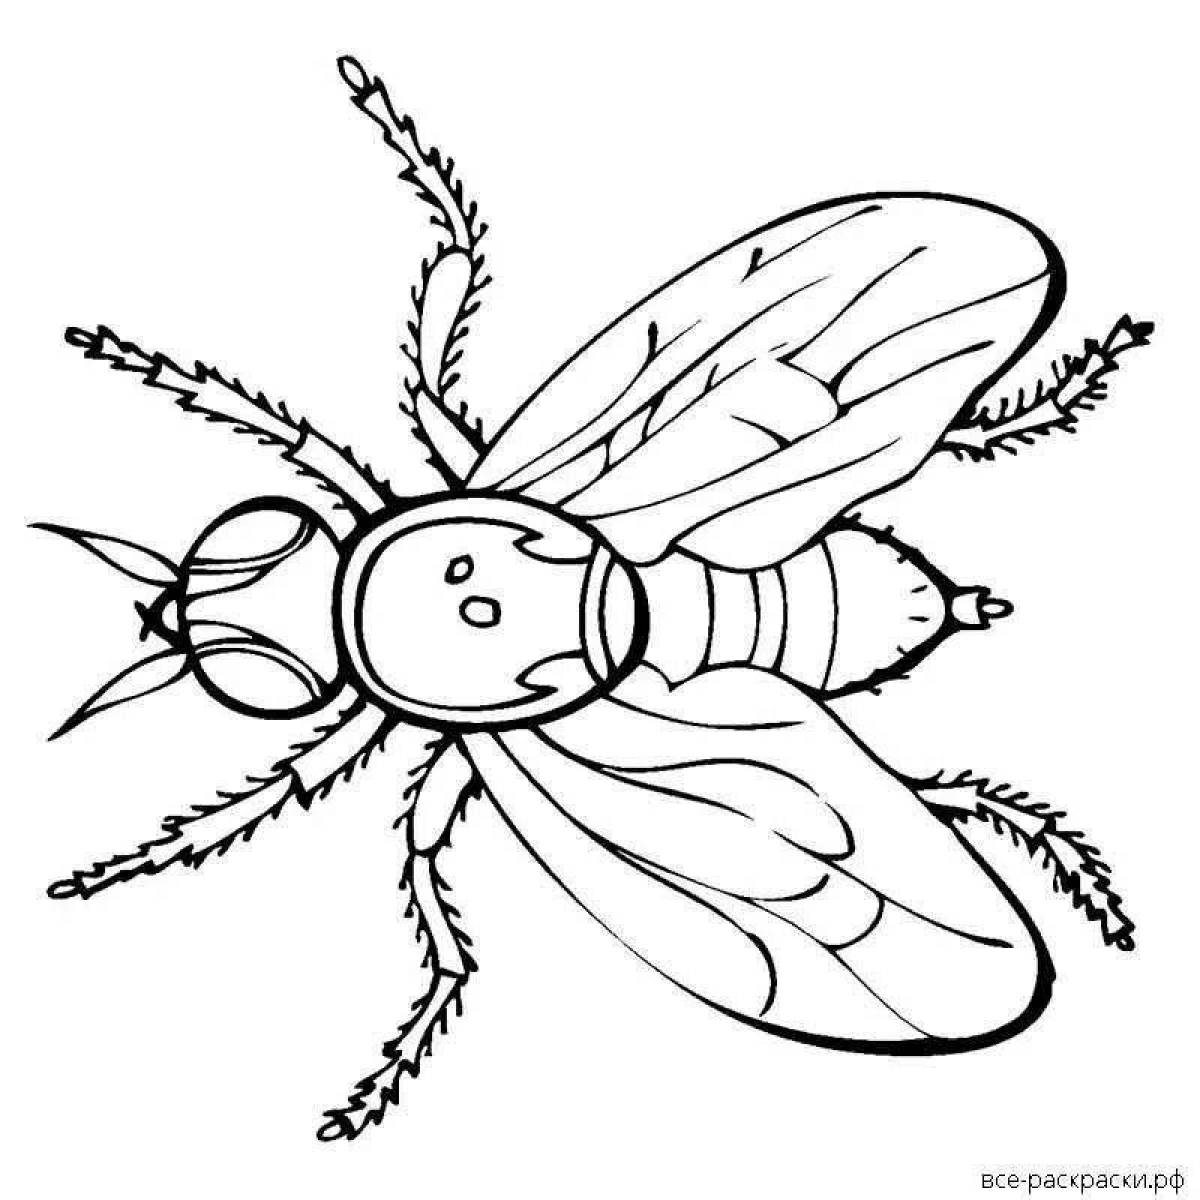 Animated fly coloring page for kids